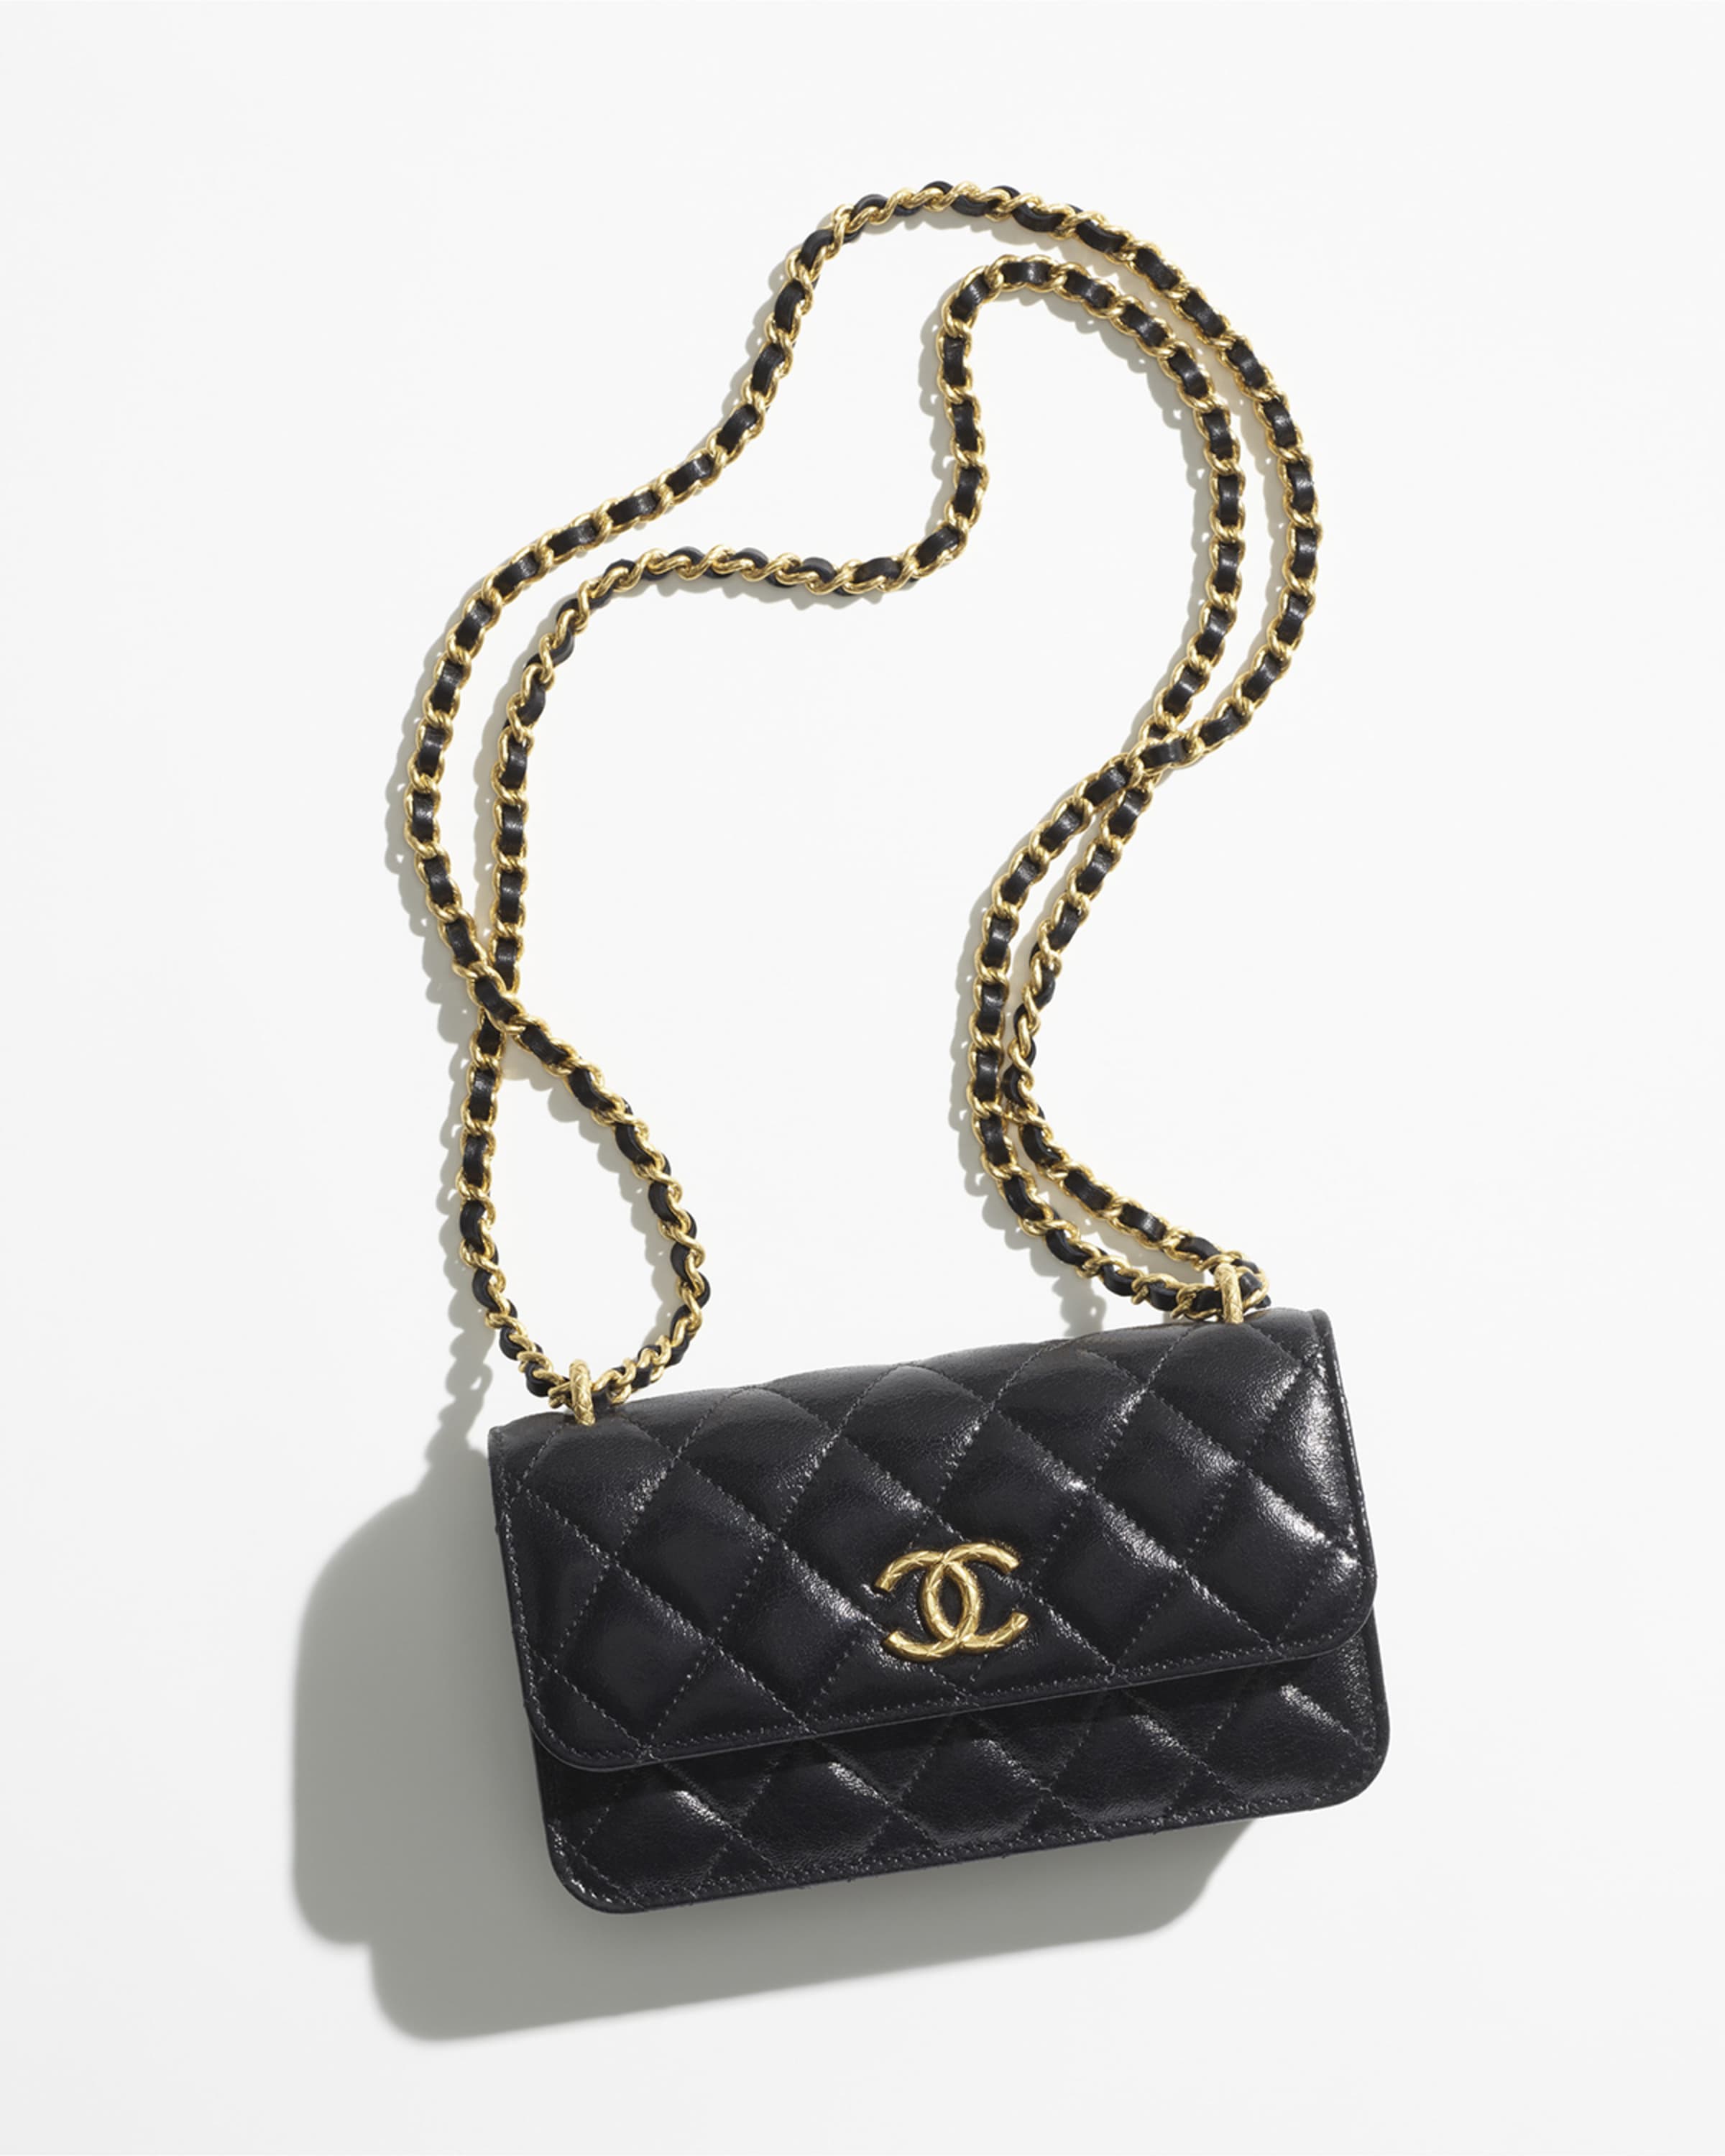 CHANEL FLAP PHONE HOLDER WITH CHAIN | Neiman Marcus